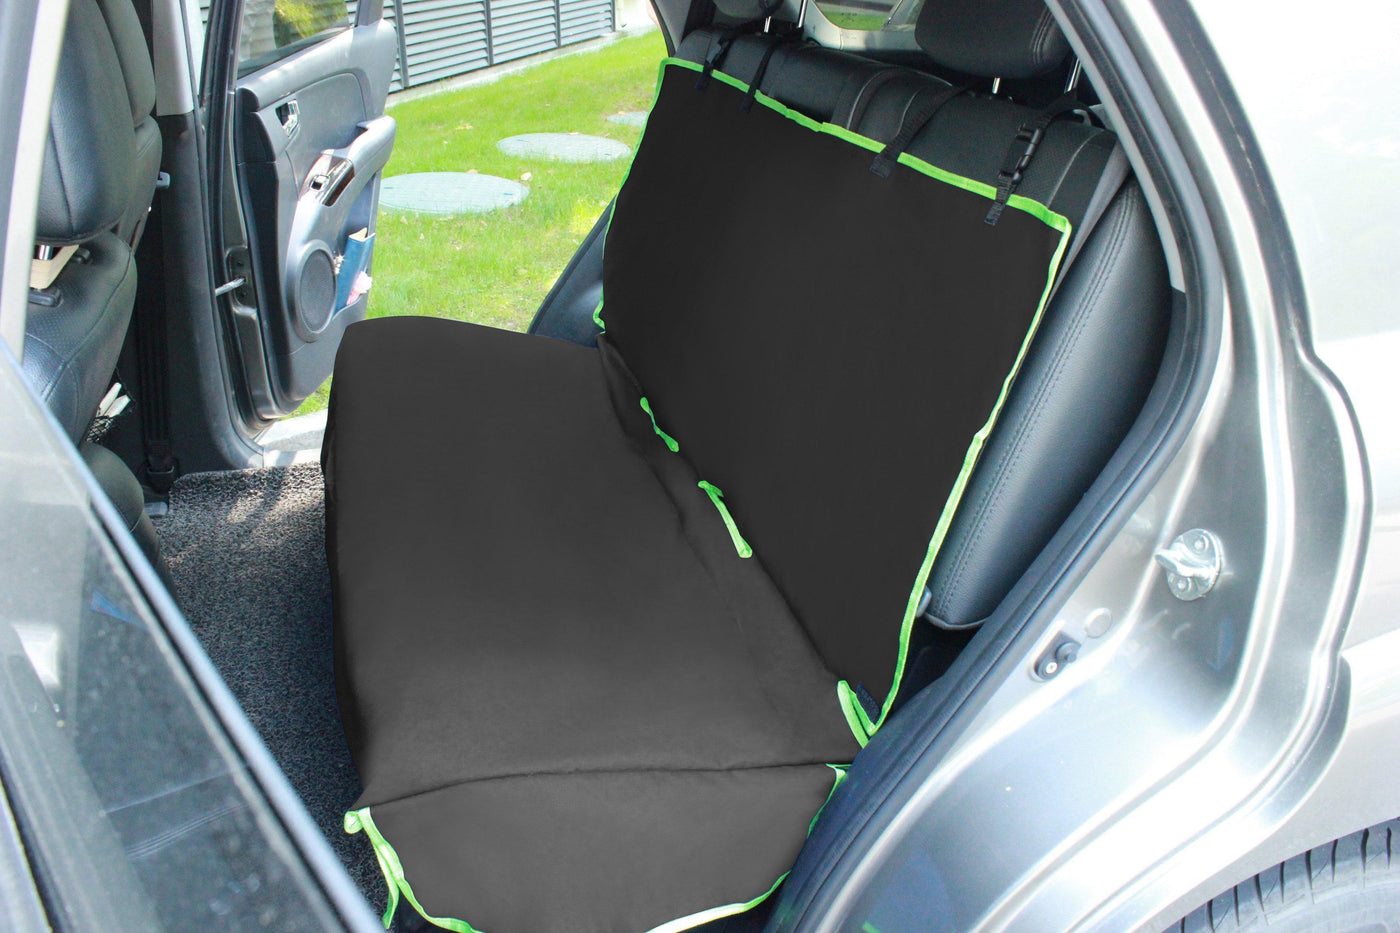 Adult/Driver Car Booster Seat for Visibility - Soft Comfortable Black Poly  Cover